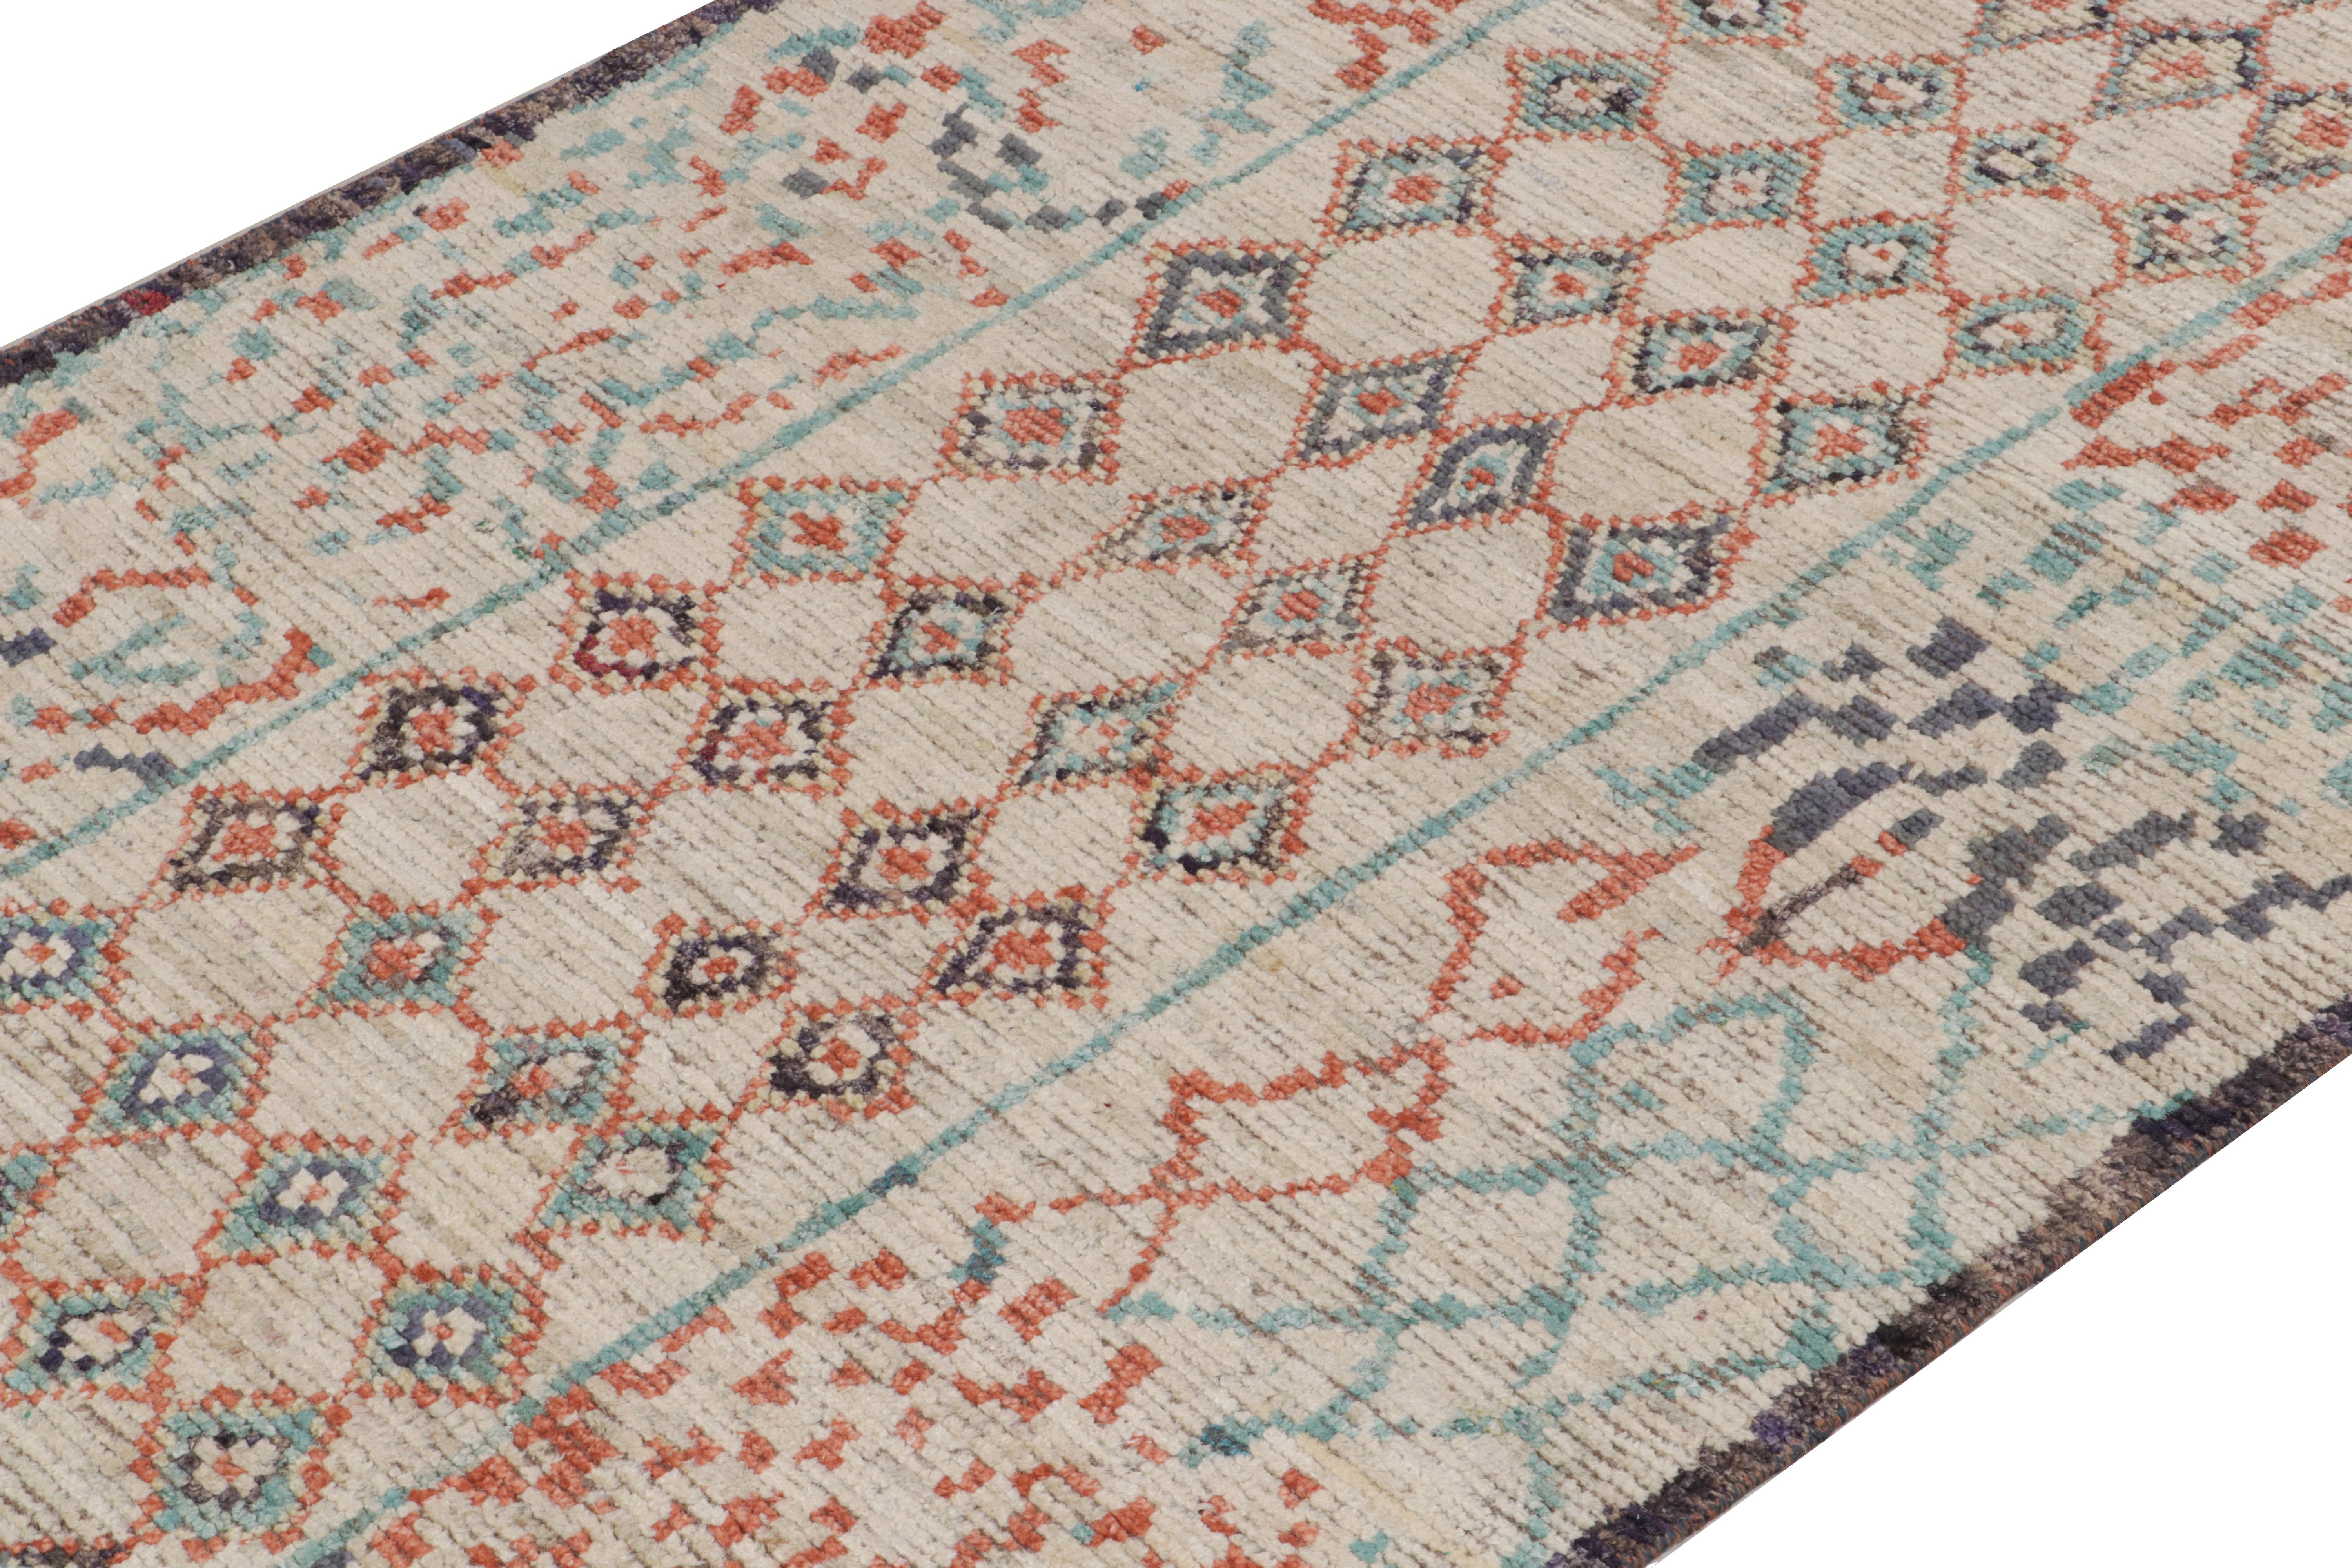 Indian Rug & Kilim's Moroccan Style Rug in Off-White, Red and Blue Geometric Pattern For Sale